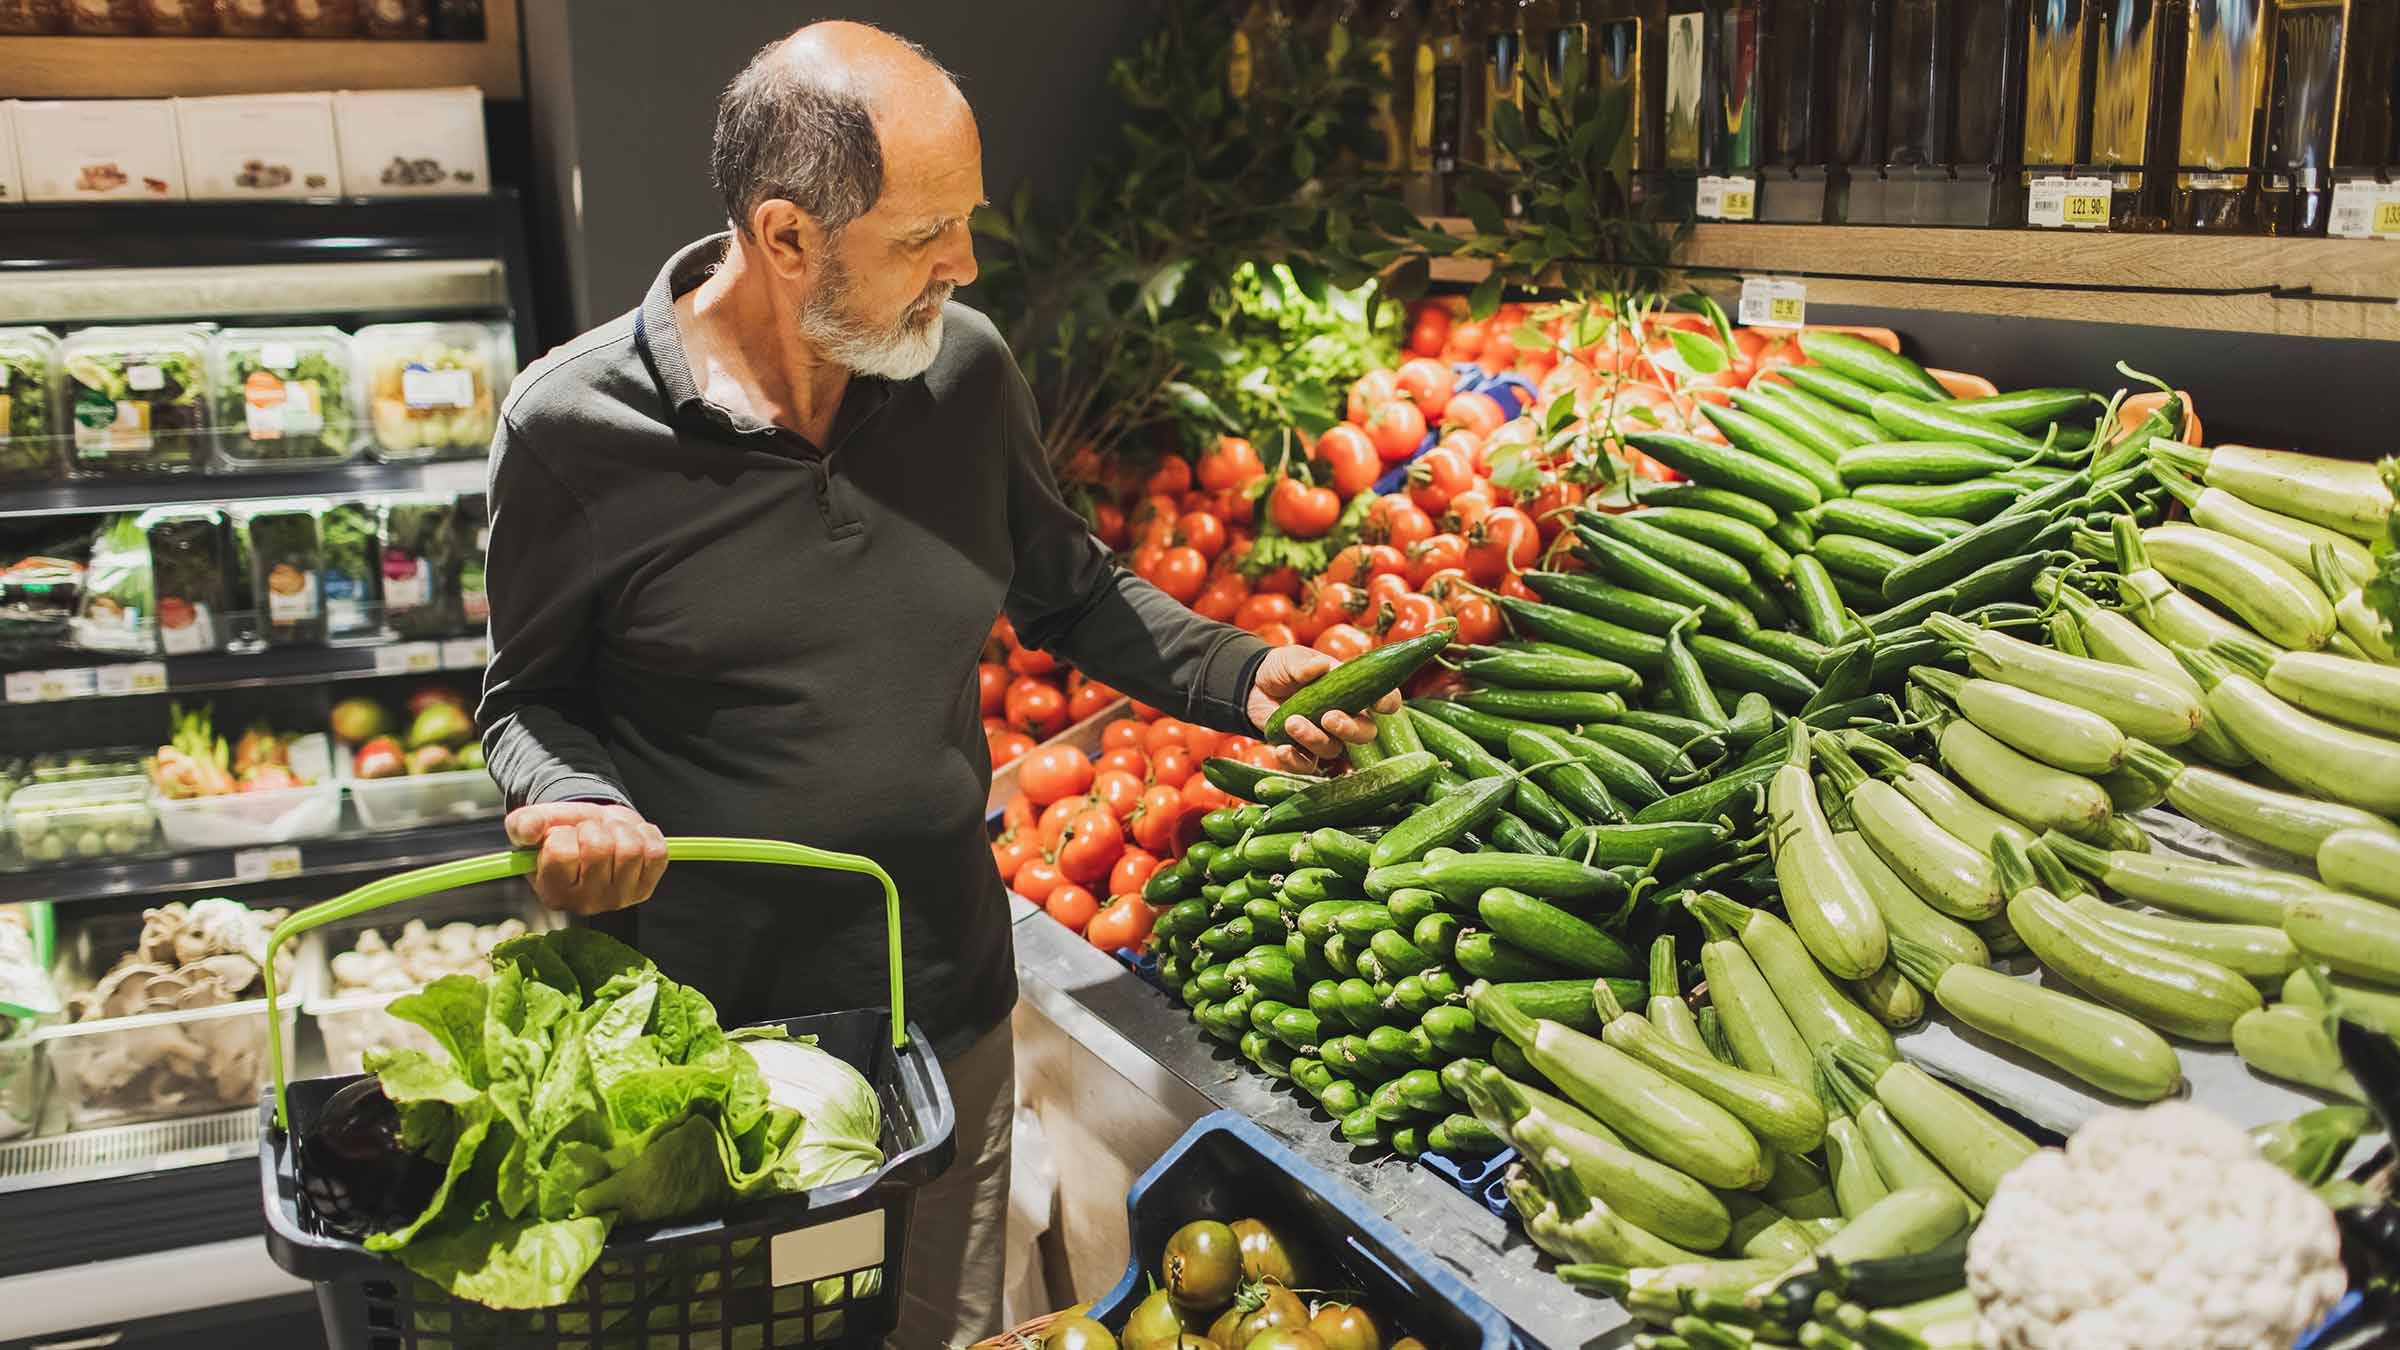 A man picking vegetables in a grocery store